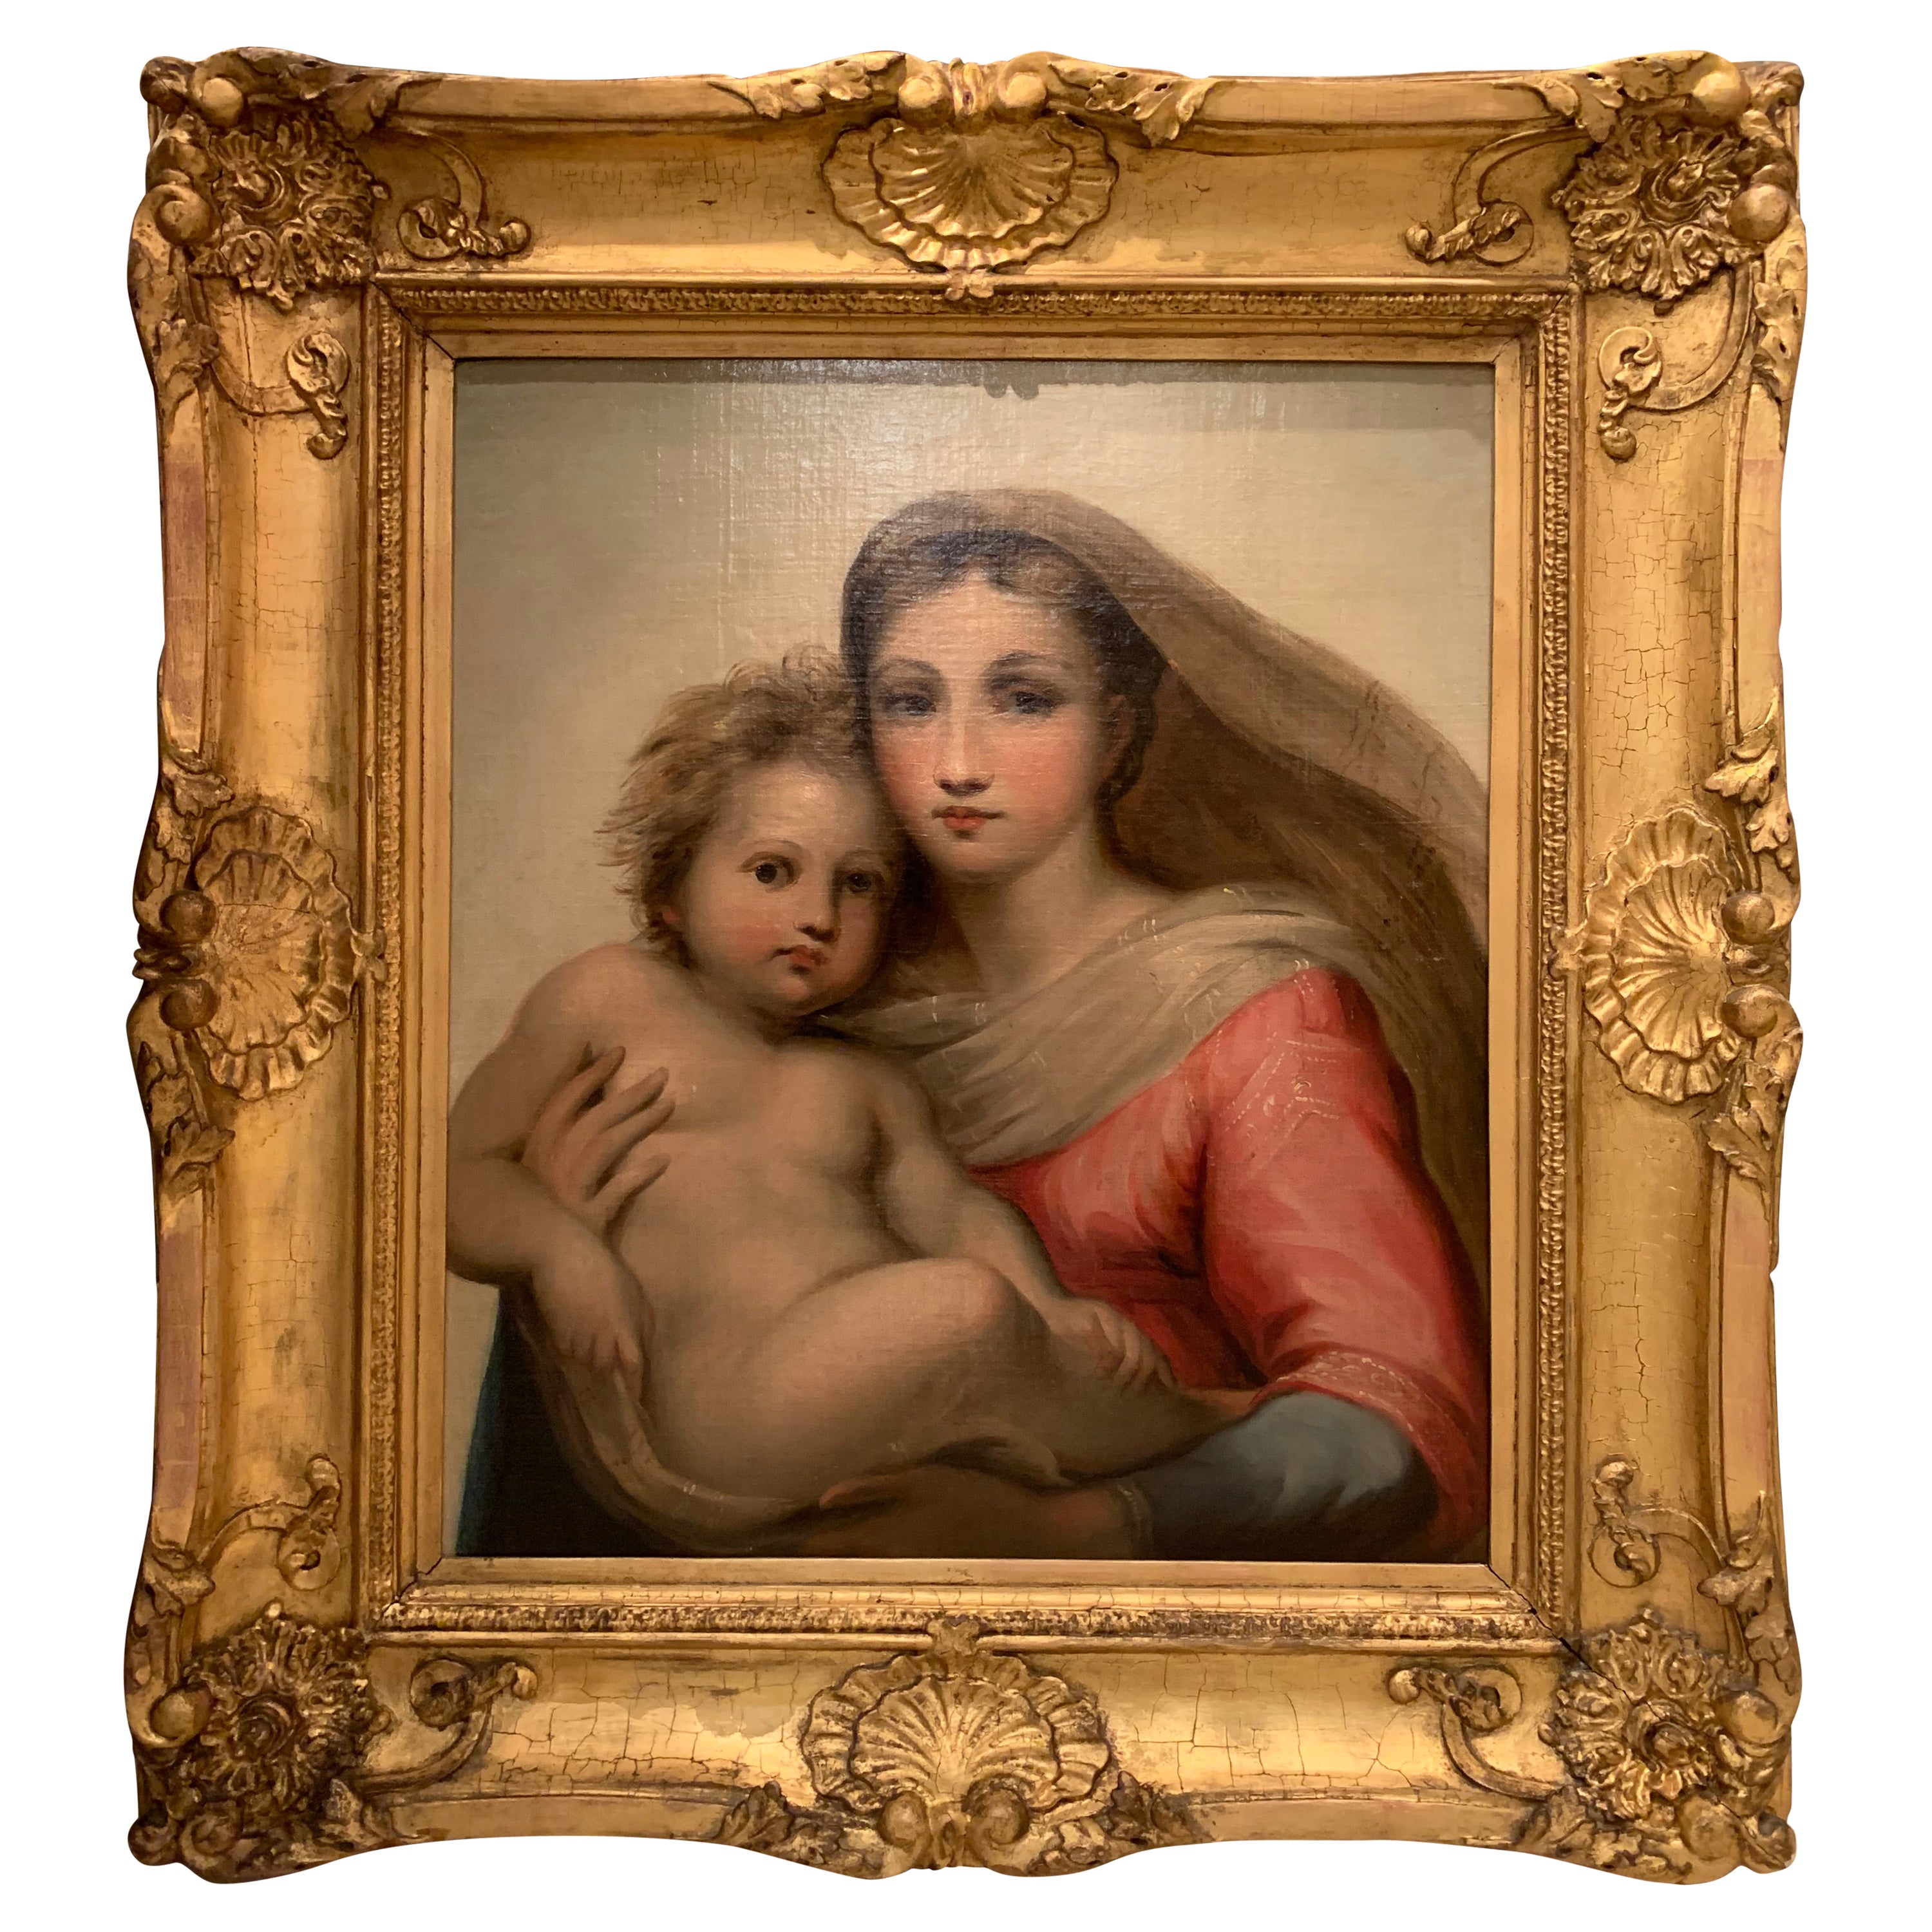 Virgin and Child "after Raphael, France About 1820